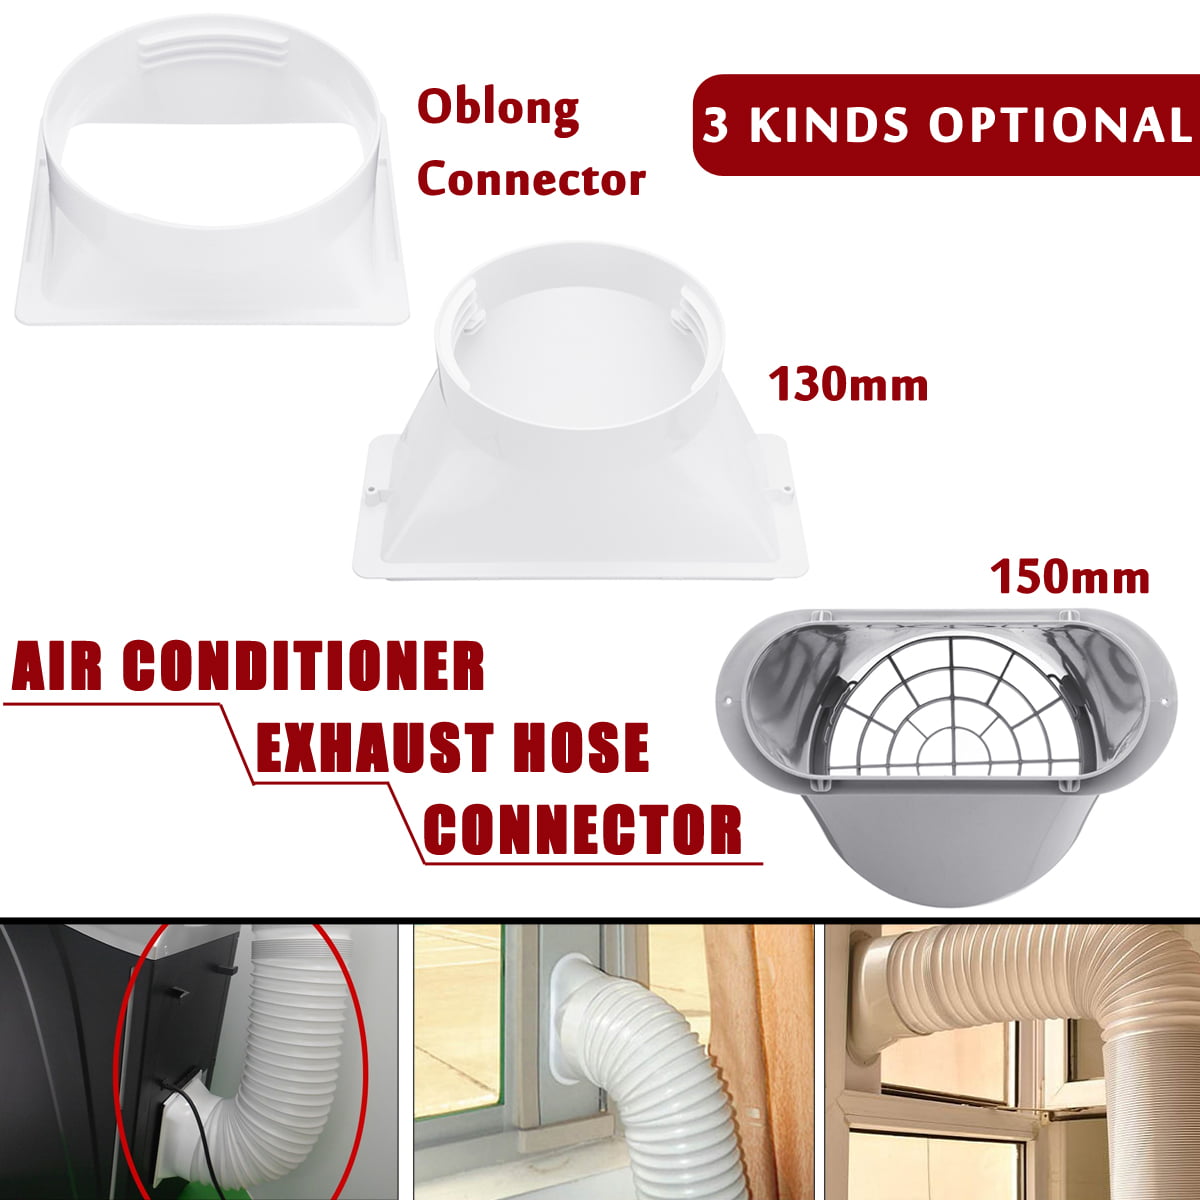 GDZTBS Air Conditioner Exhaust Hose Adapter Universal Window Adaptor Exhaust Pipe Adapter Hose Connector Window Adaptor Tube for Portable Air Conditioner Spare Parts 